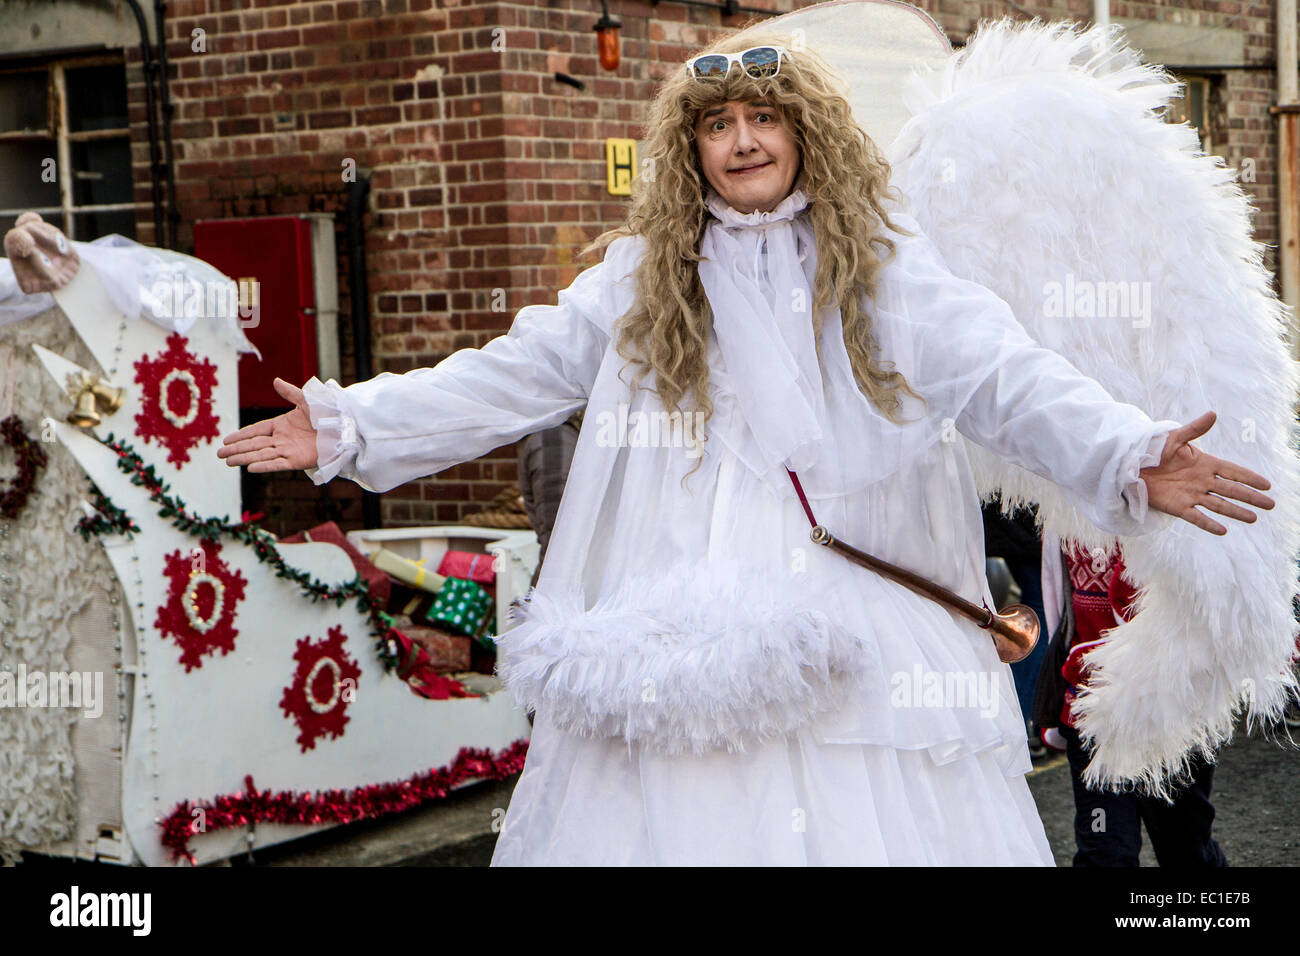 Victorian Festival of Christmas Portsmouth Stock Photo